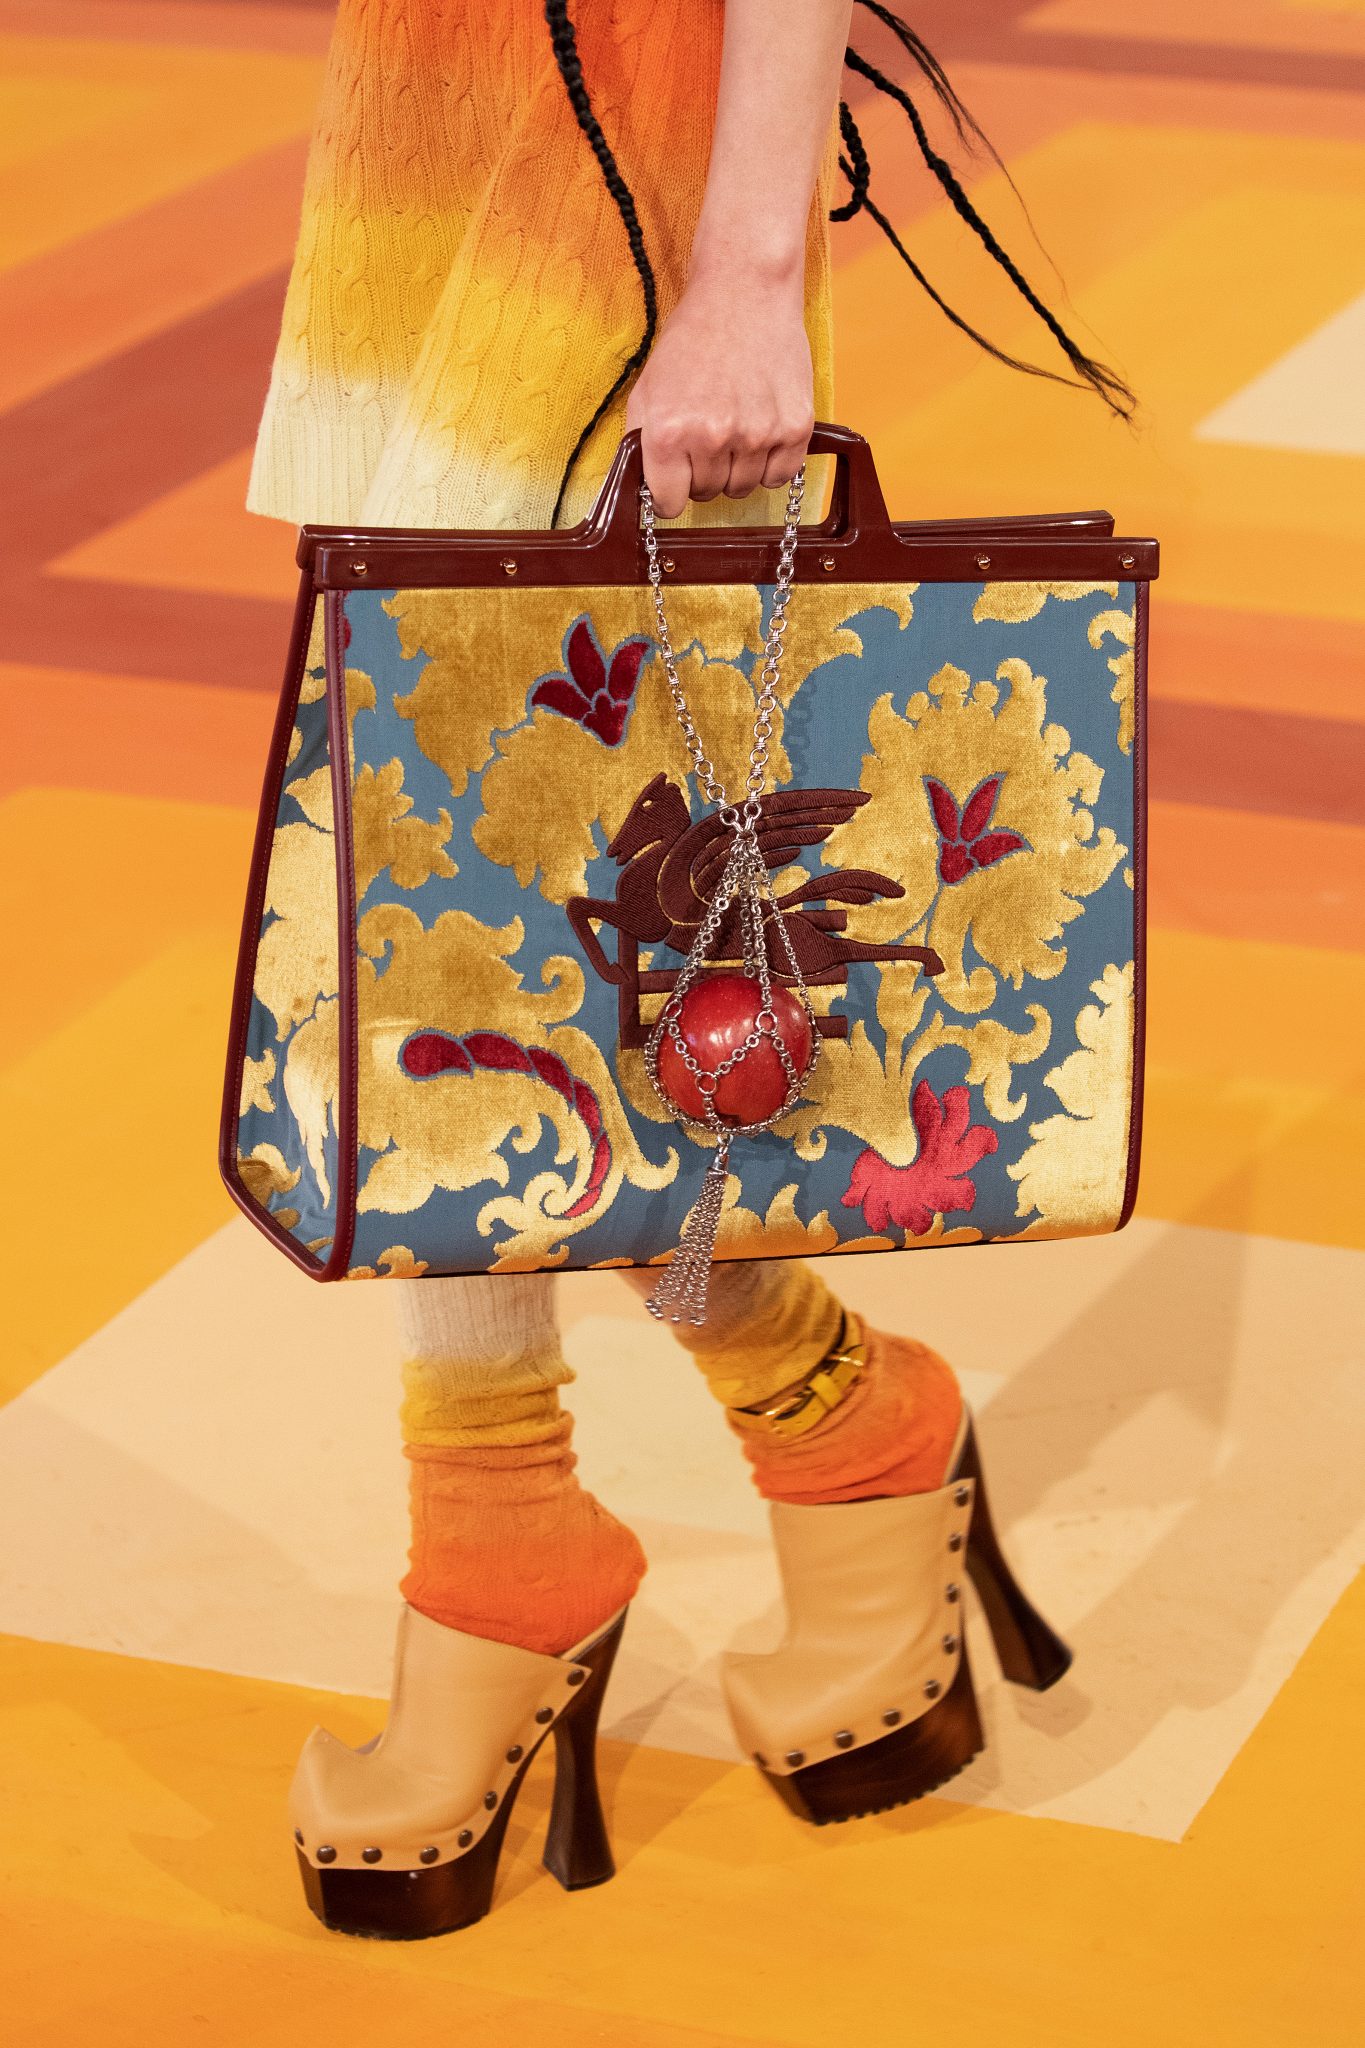 Taking my Vela Bag on a stroll! @etro @marcodevincenzo